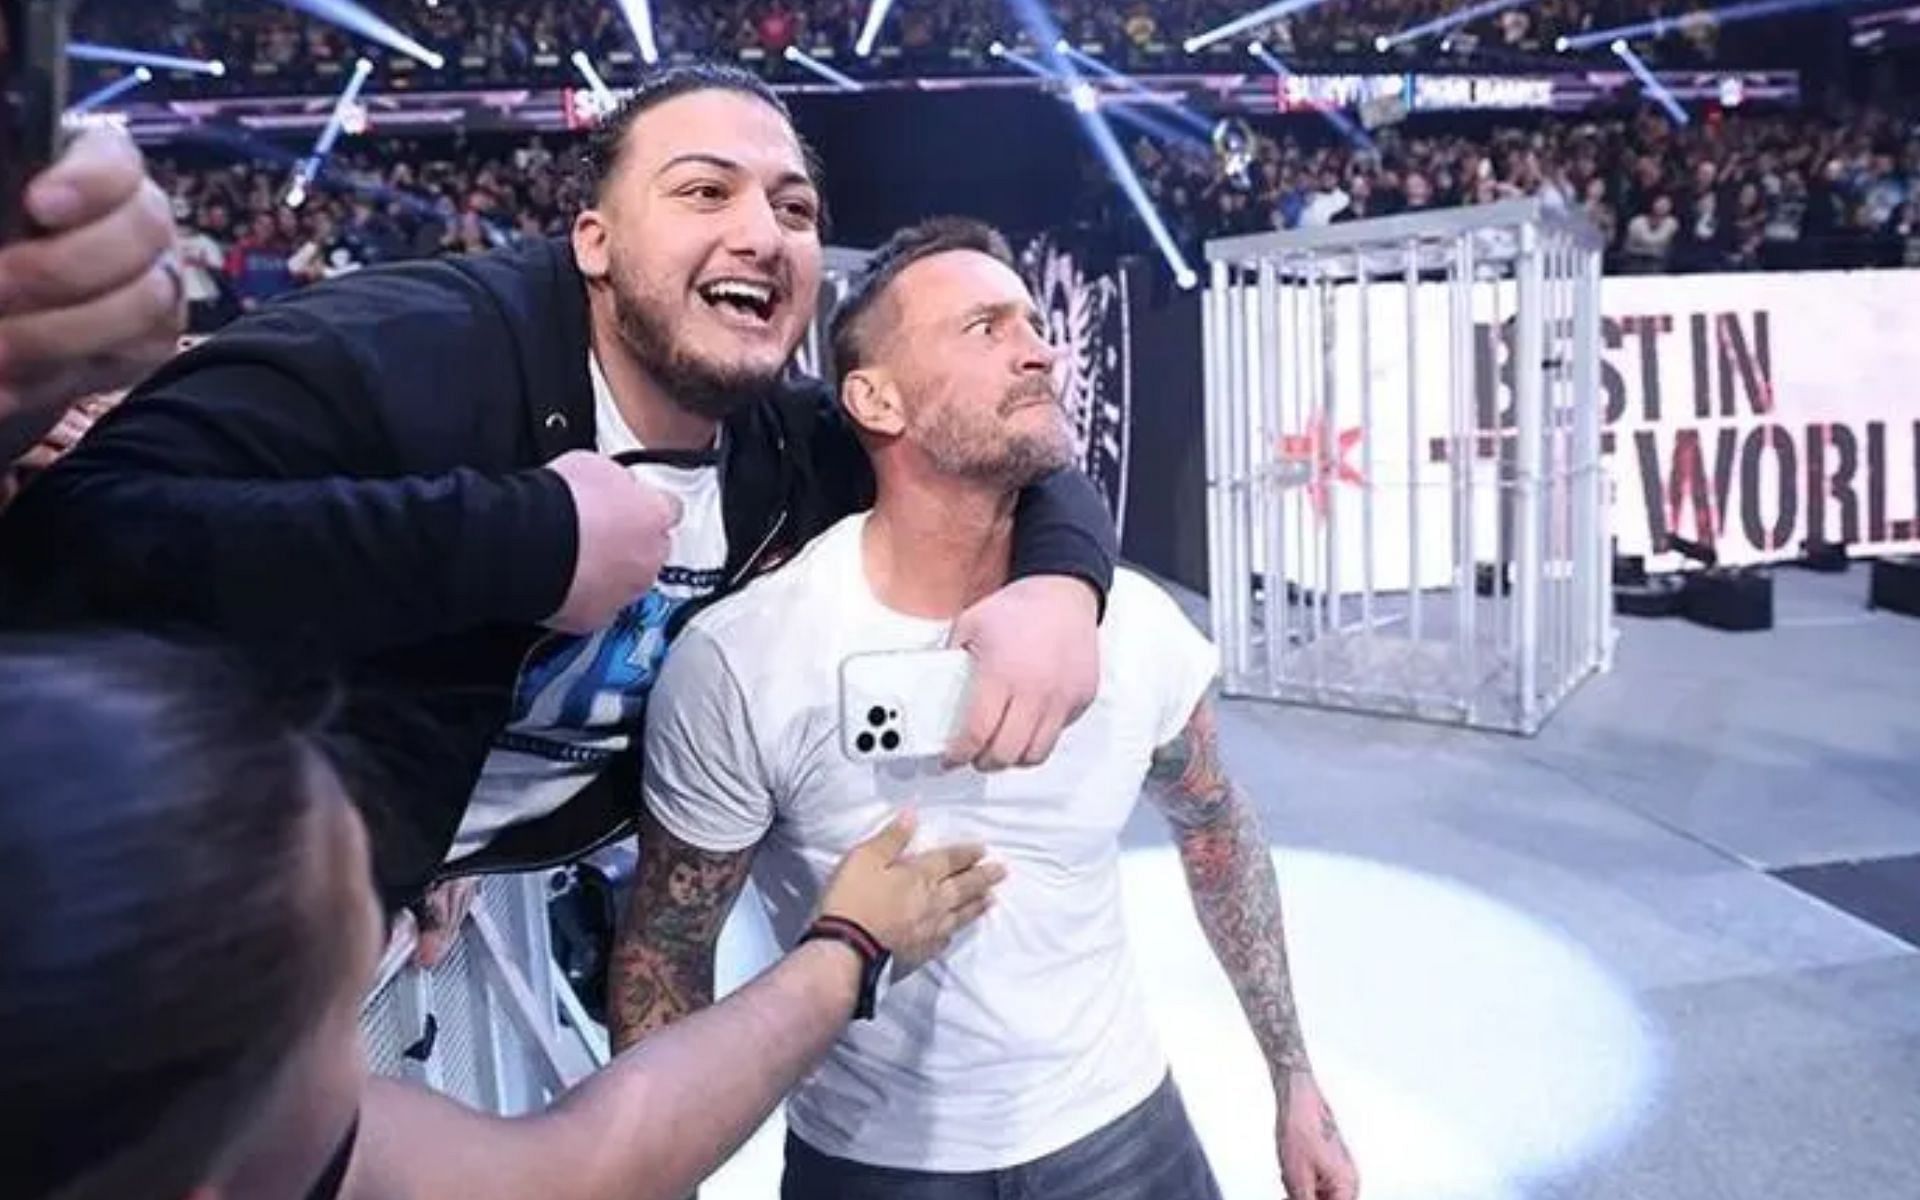 Punk has been embraced by fans since his return